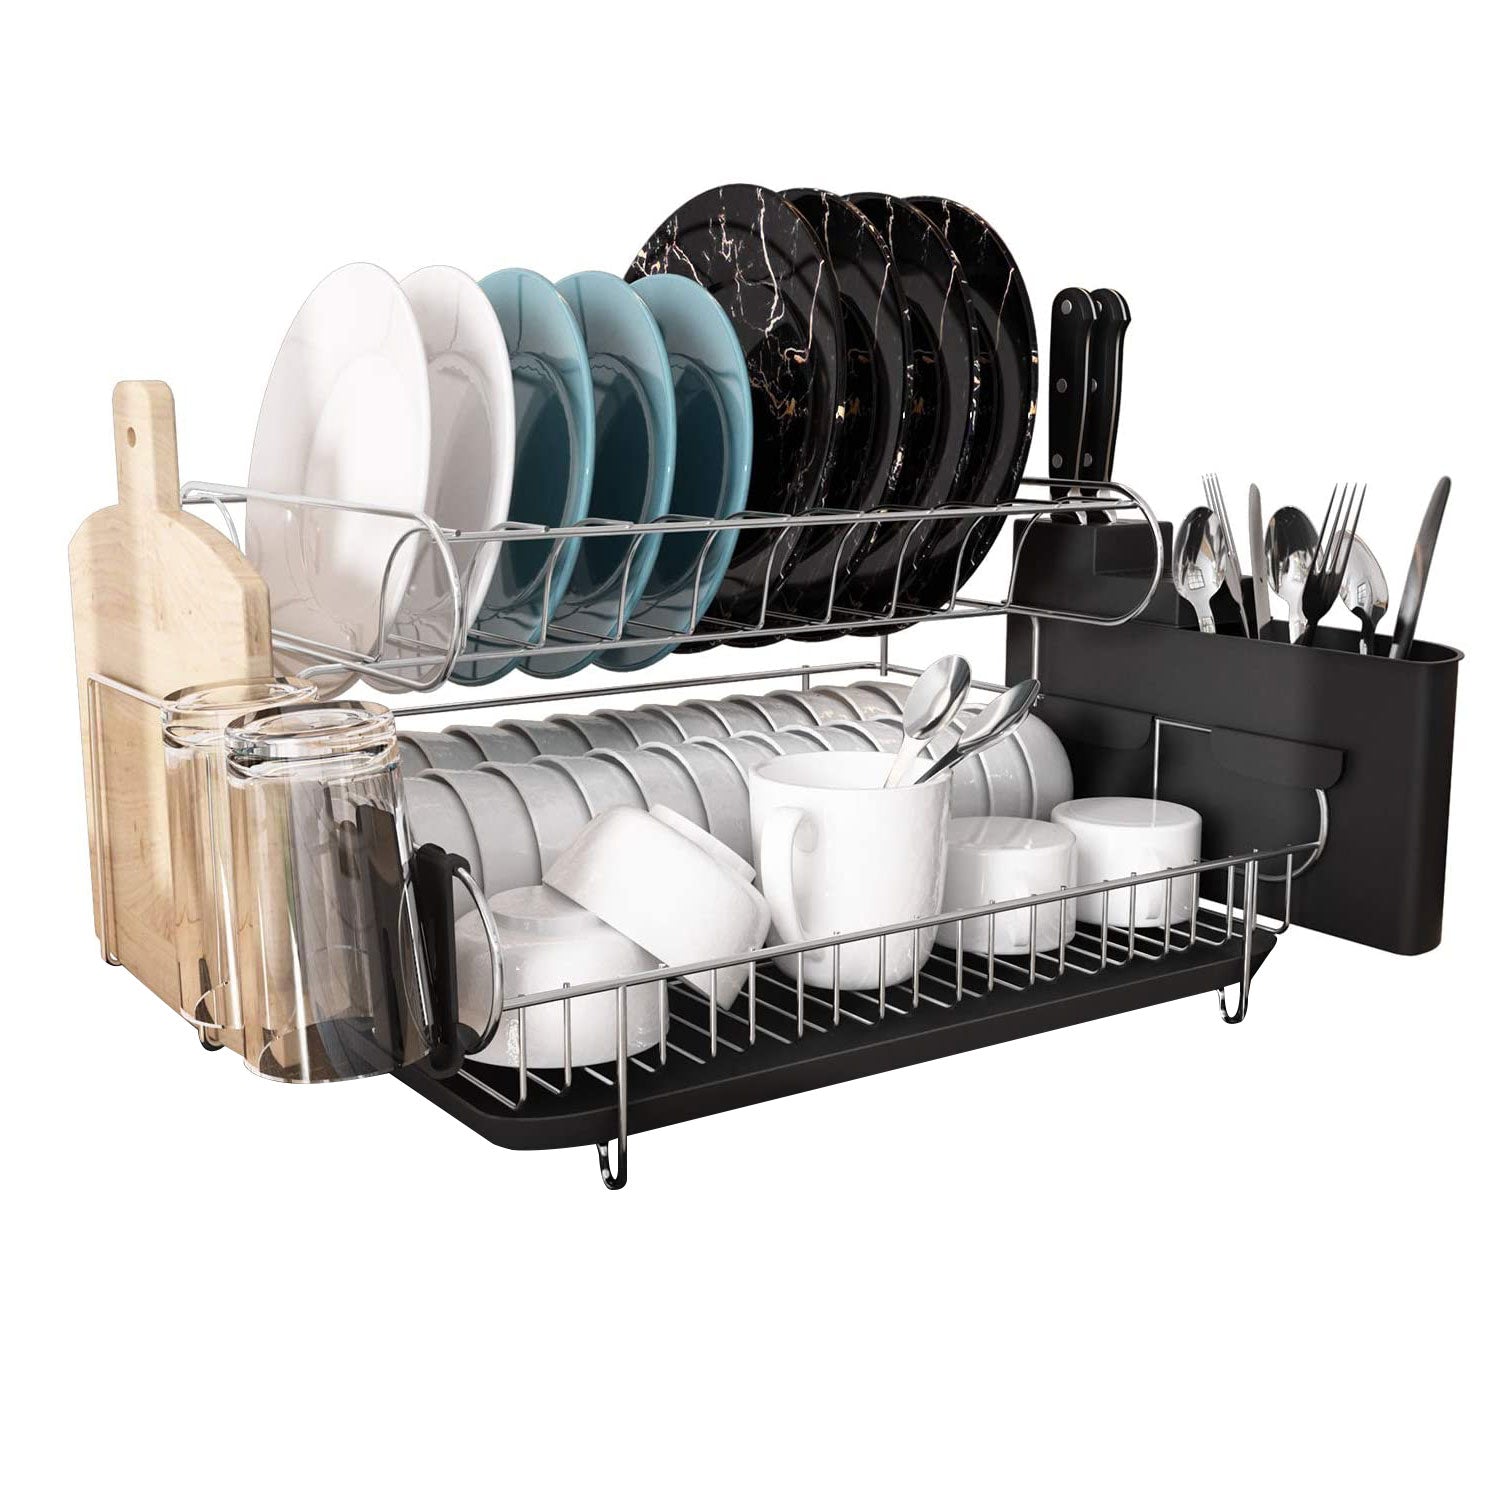 Dish Drying Rack Stainless Steel Dish Rack with Cup Utensil Holder